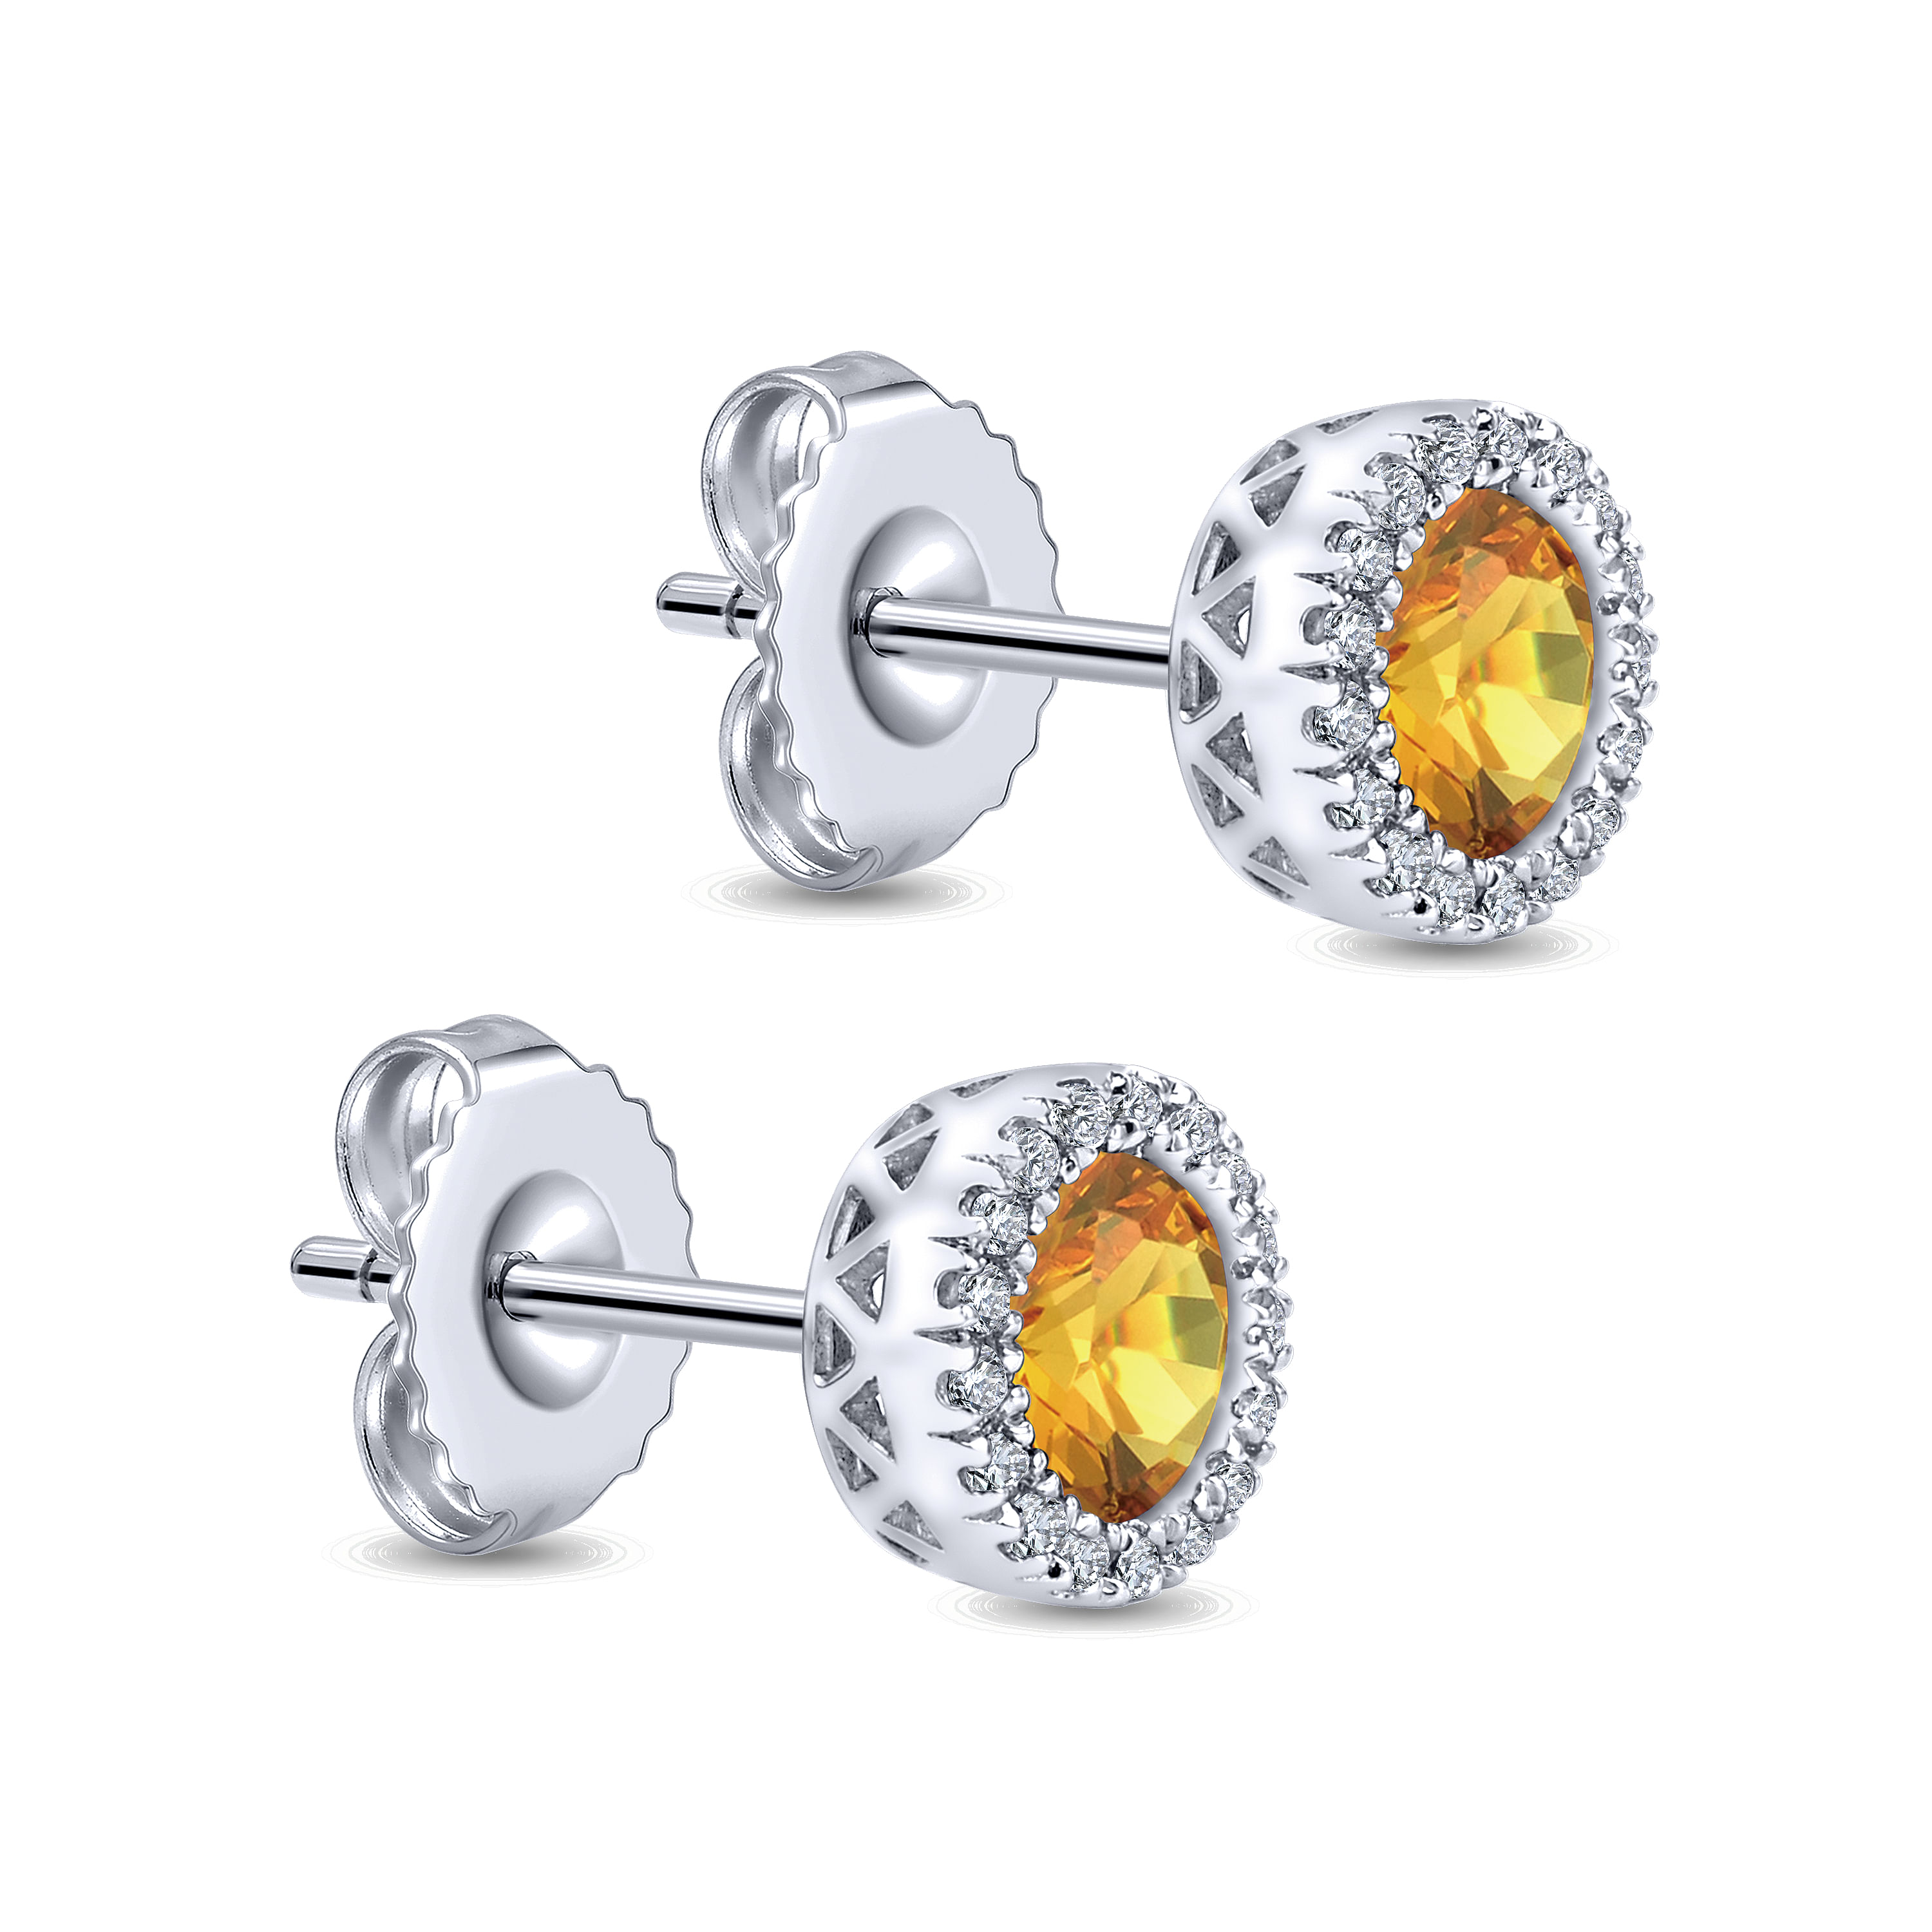 14K White Gold Round Halo Citrine and Diamond Stud Earrings